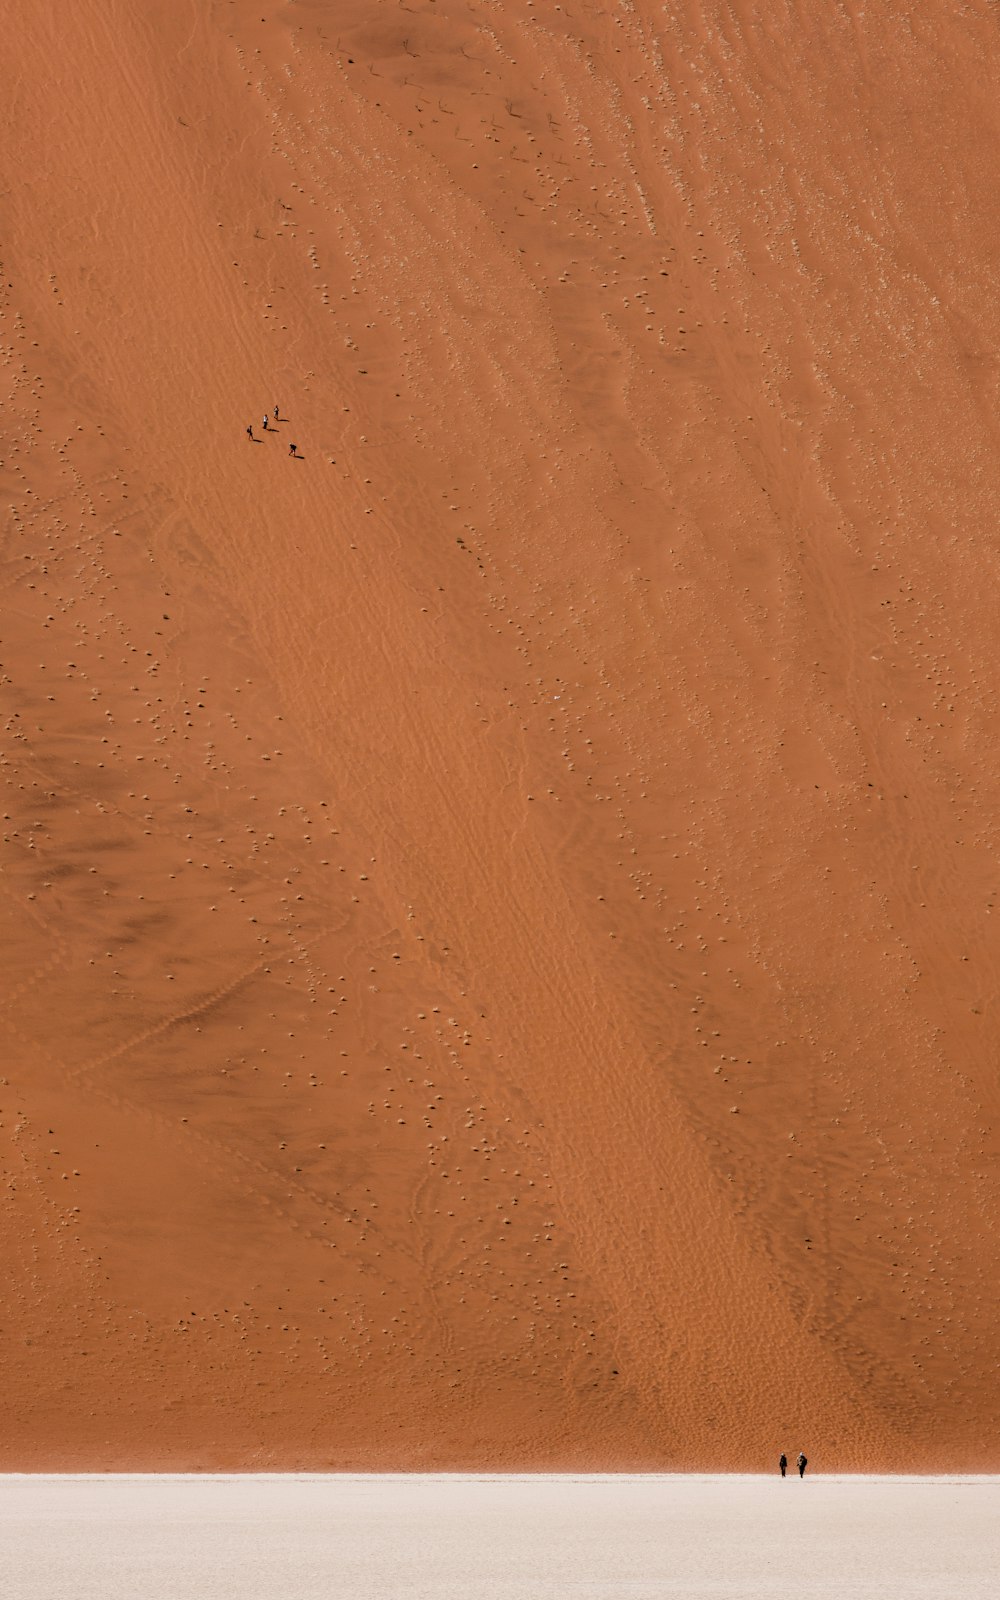 people walking on a sand dune